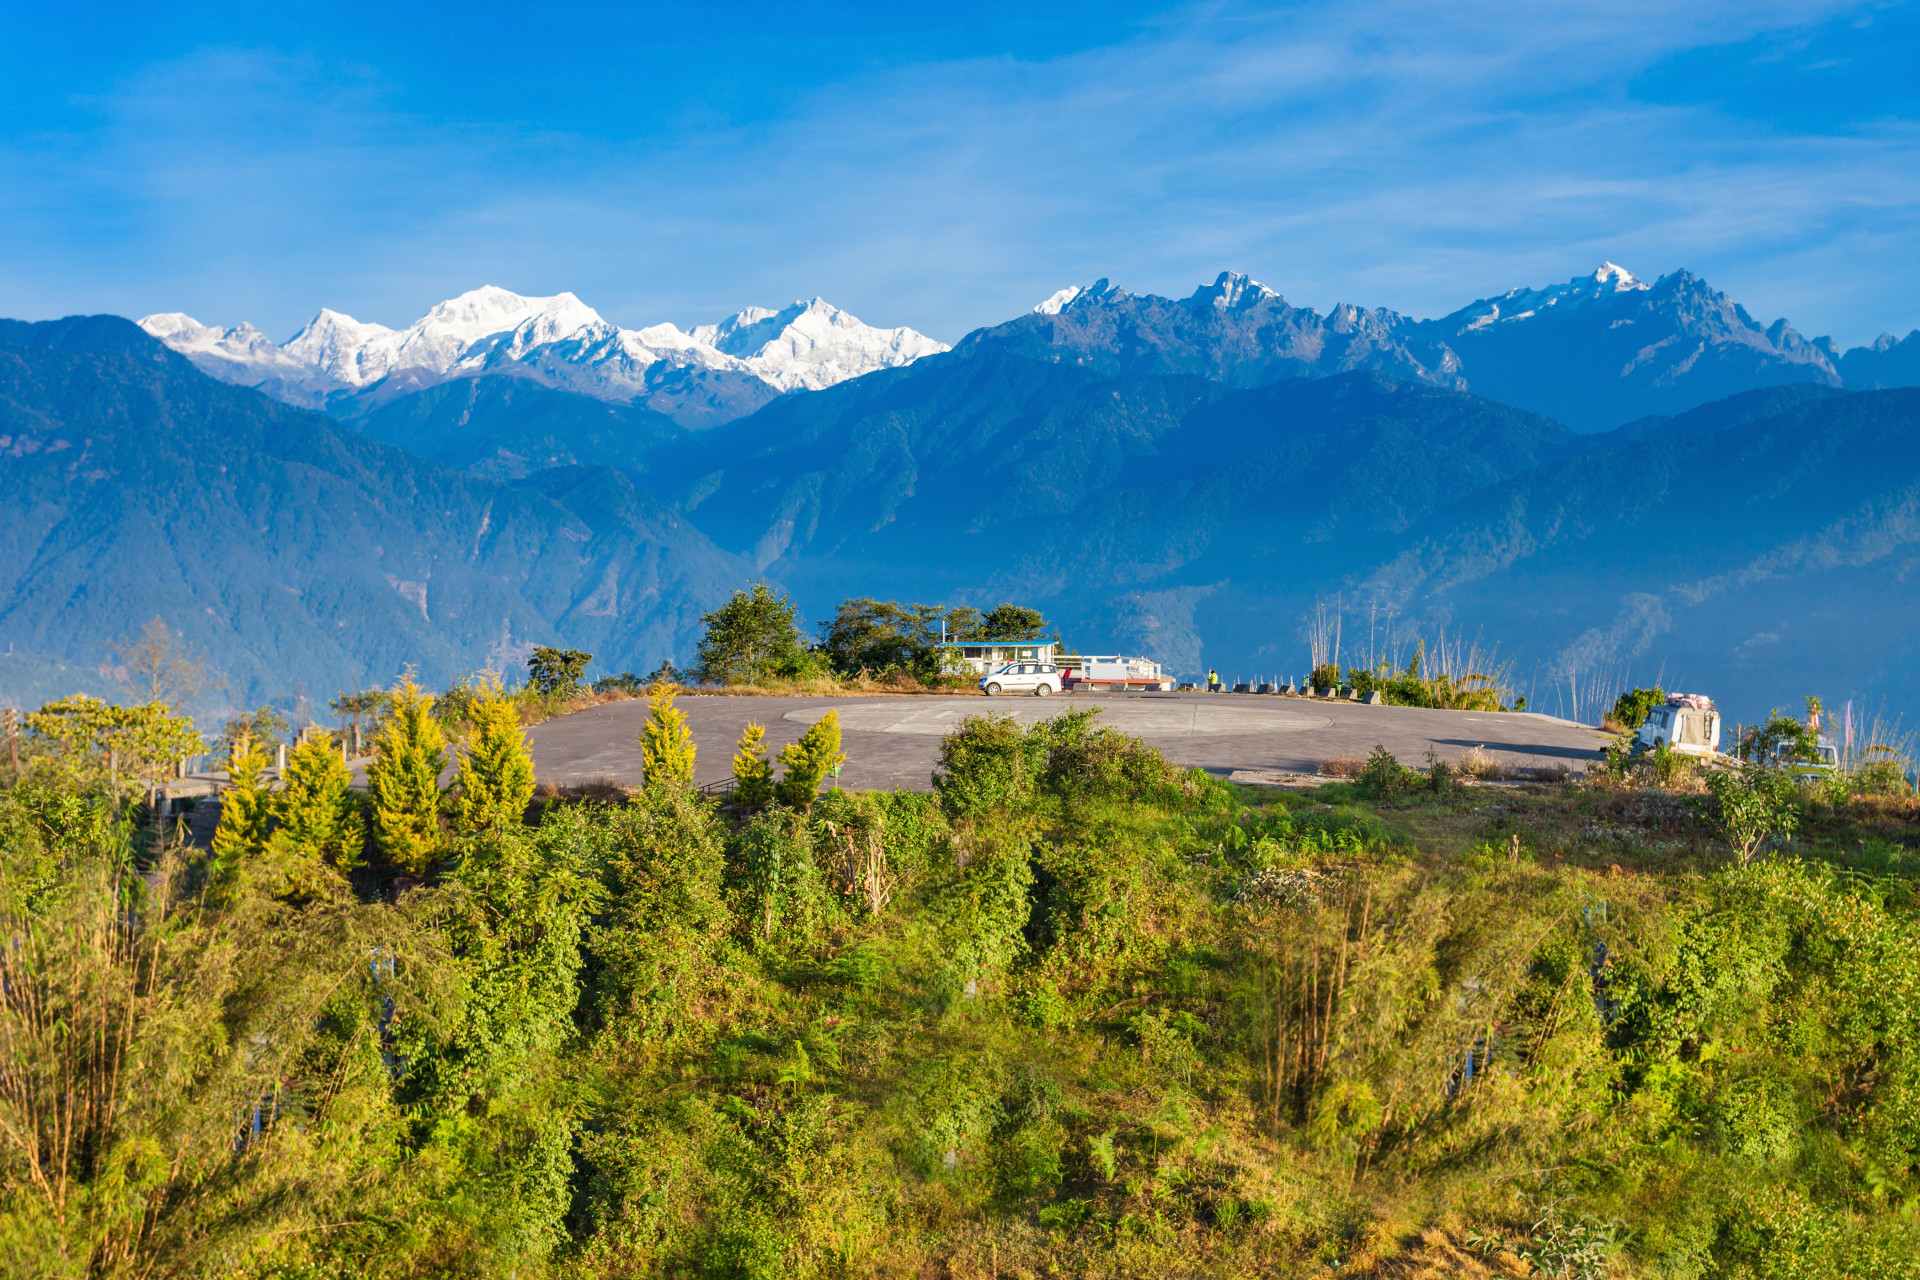 It's the highest mountain in the country and the third-highest in the world. The 28,169 ft (8,586 m) mountain is located in the Himalayan ridge and bordered by Nepal.<p>You may also like:<a href="https://www.starsinsider.com/n/423240?utm_source=msn.com&utm_medium=display&utm_campaign=referral_description&utm_content=128096en-in"> Nasty comments celebs made about their exes</a></p>